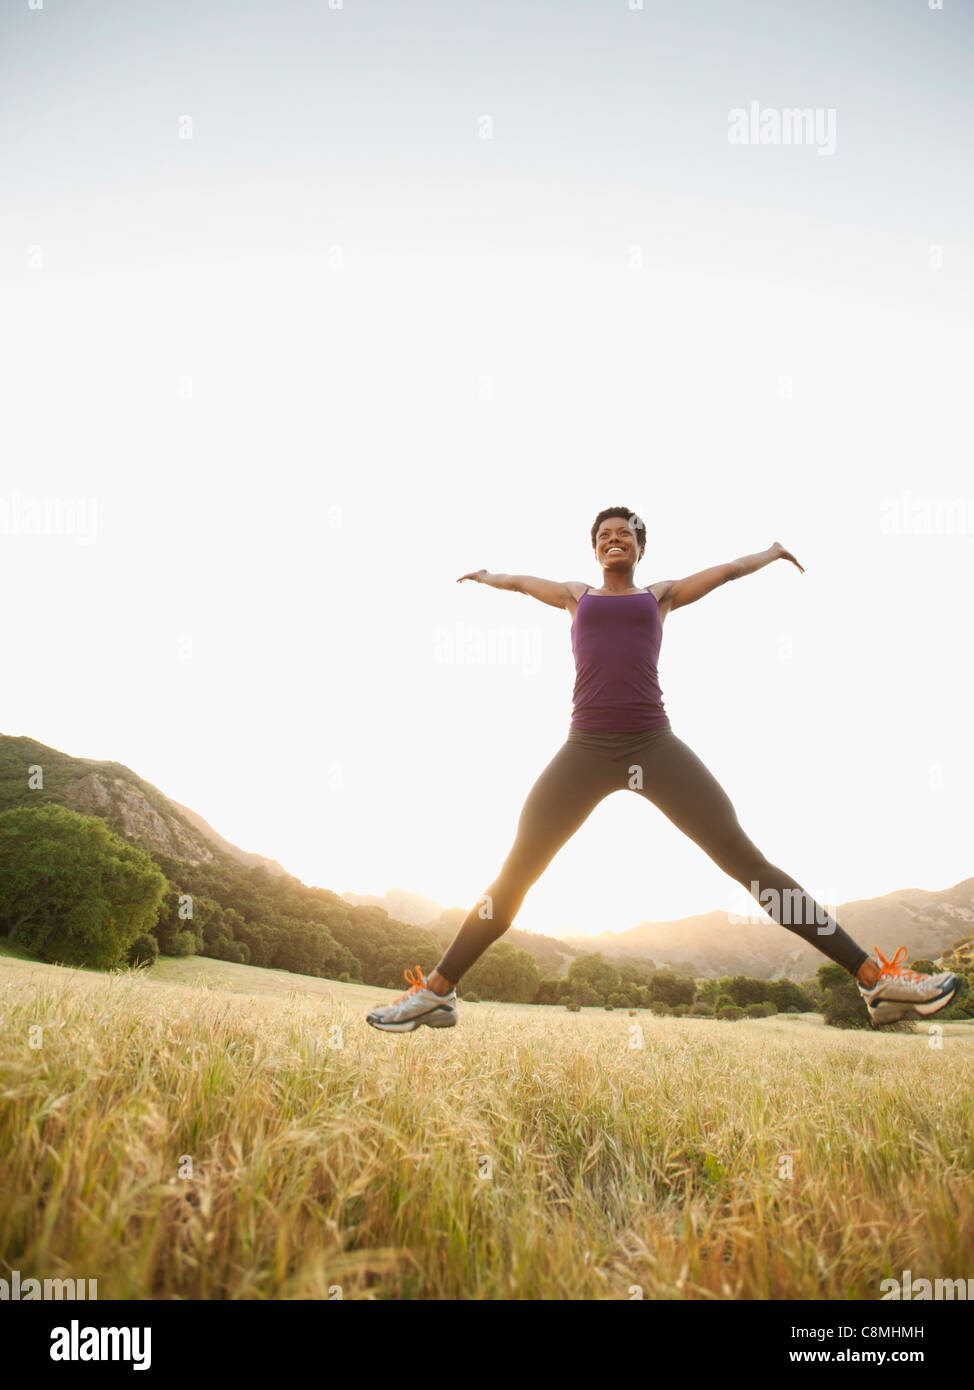 Mixed race woman jumping in remote field Stock Photo